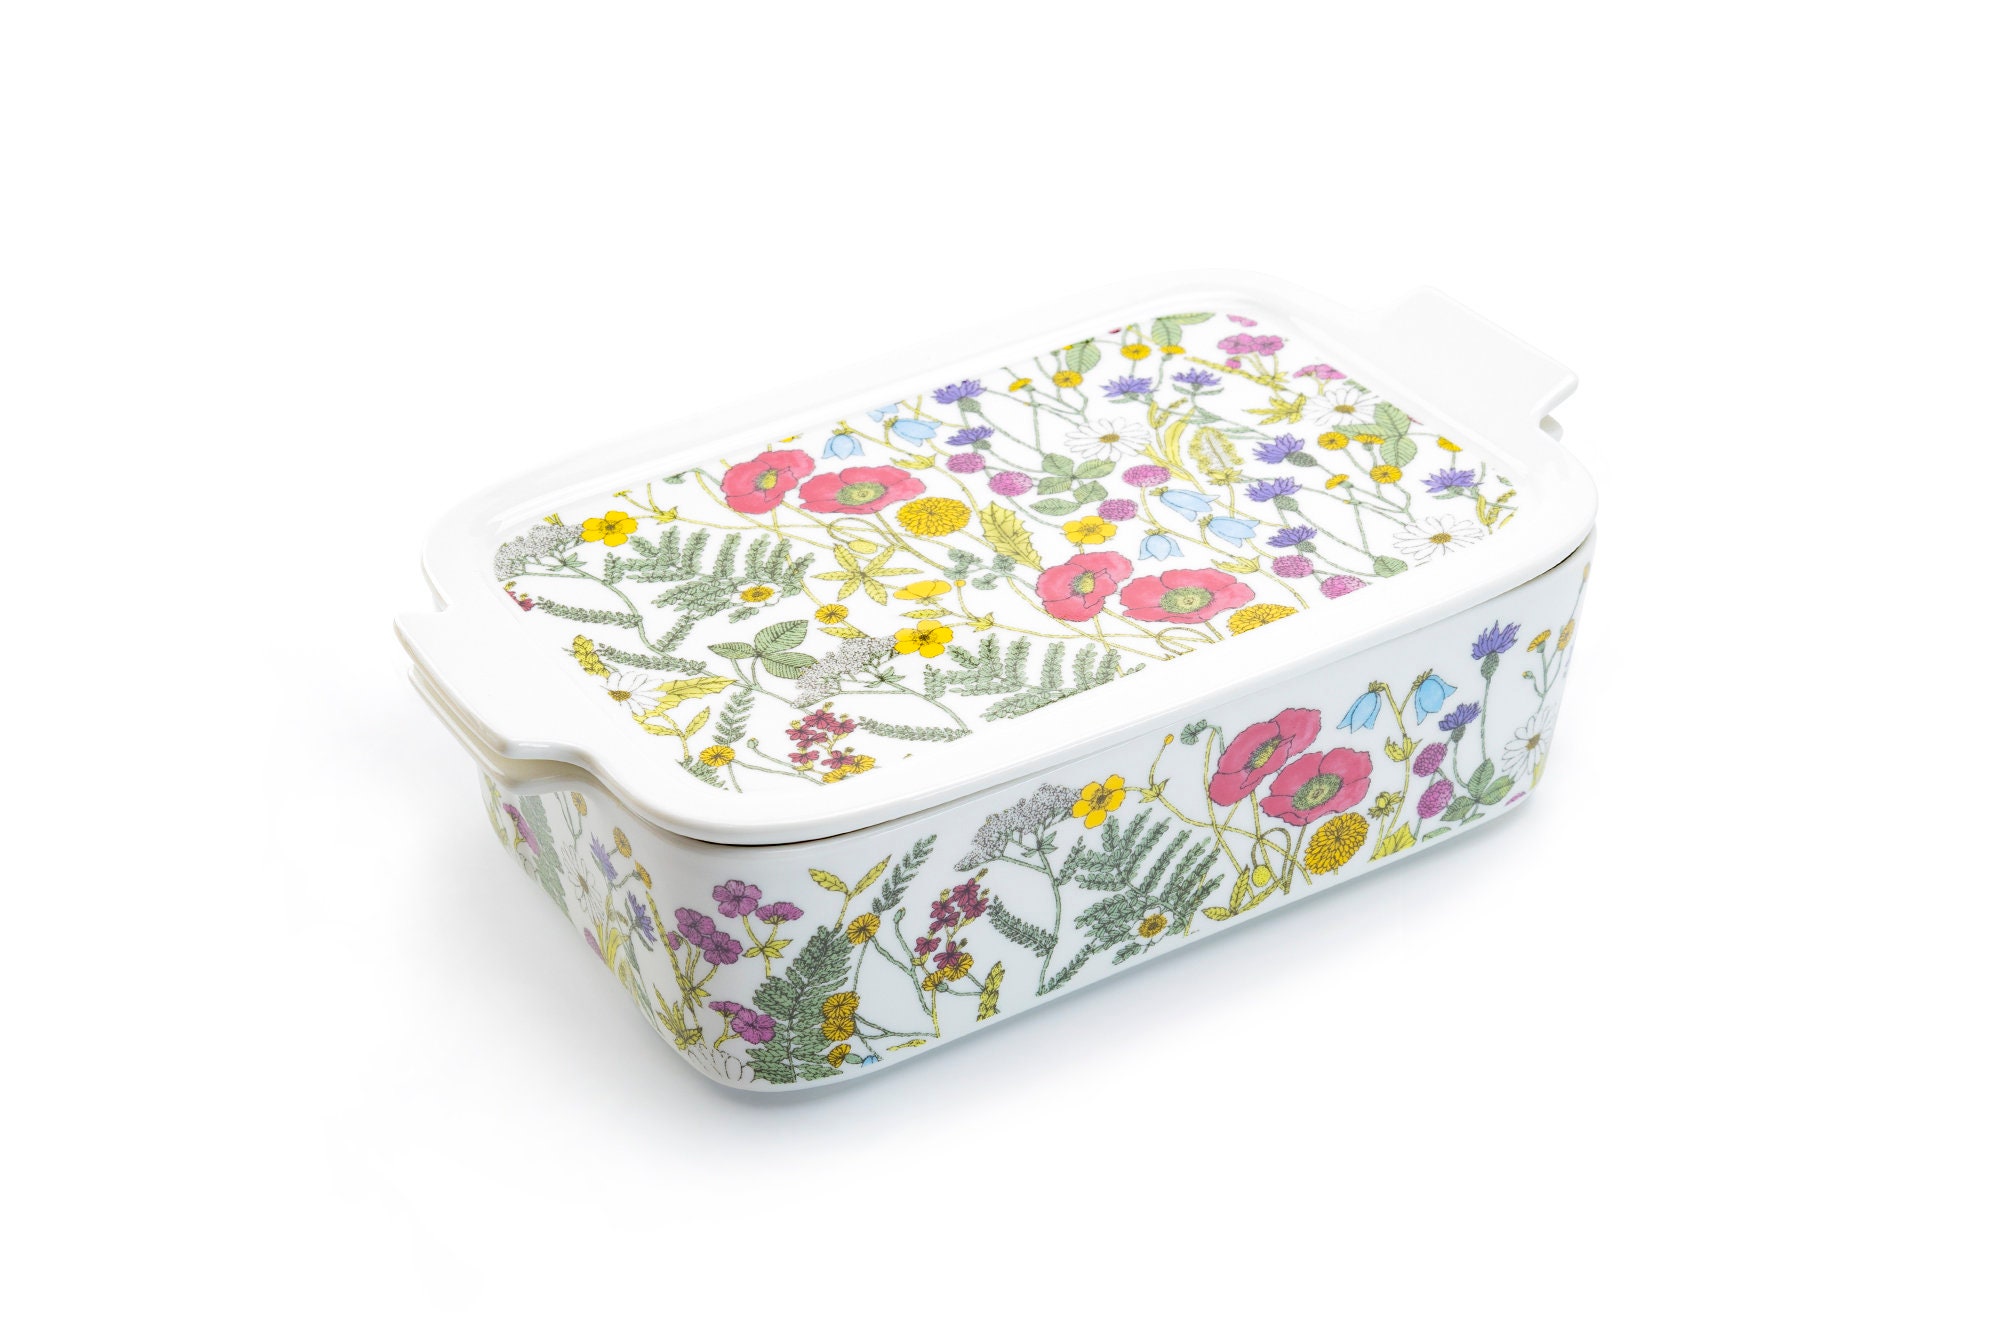 New Grace Pantry Floral Porcelain Microwavable Storage Bowls with